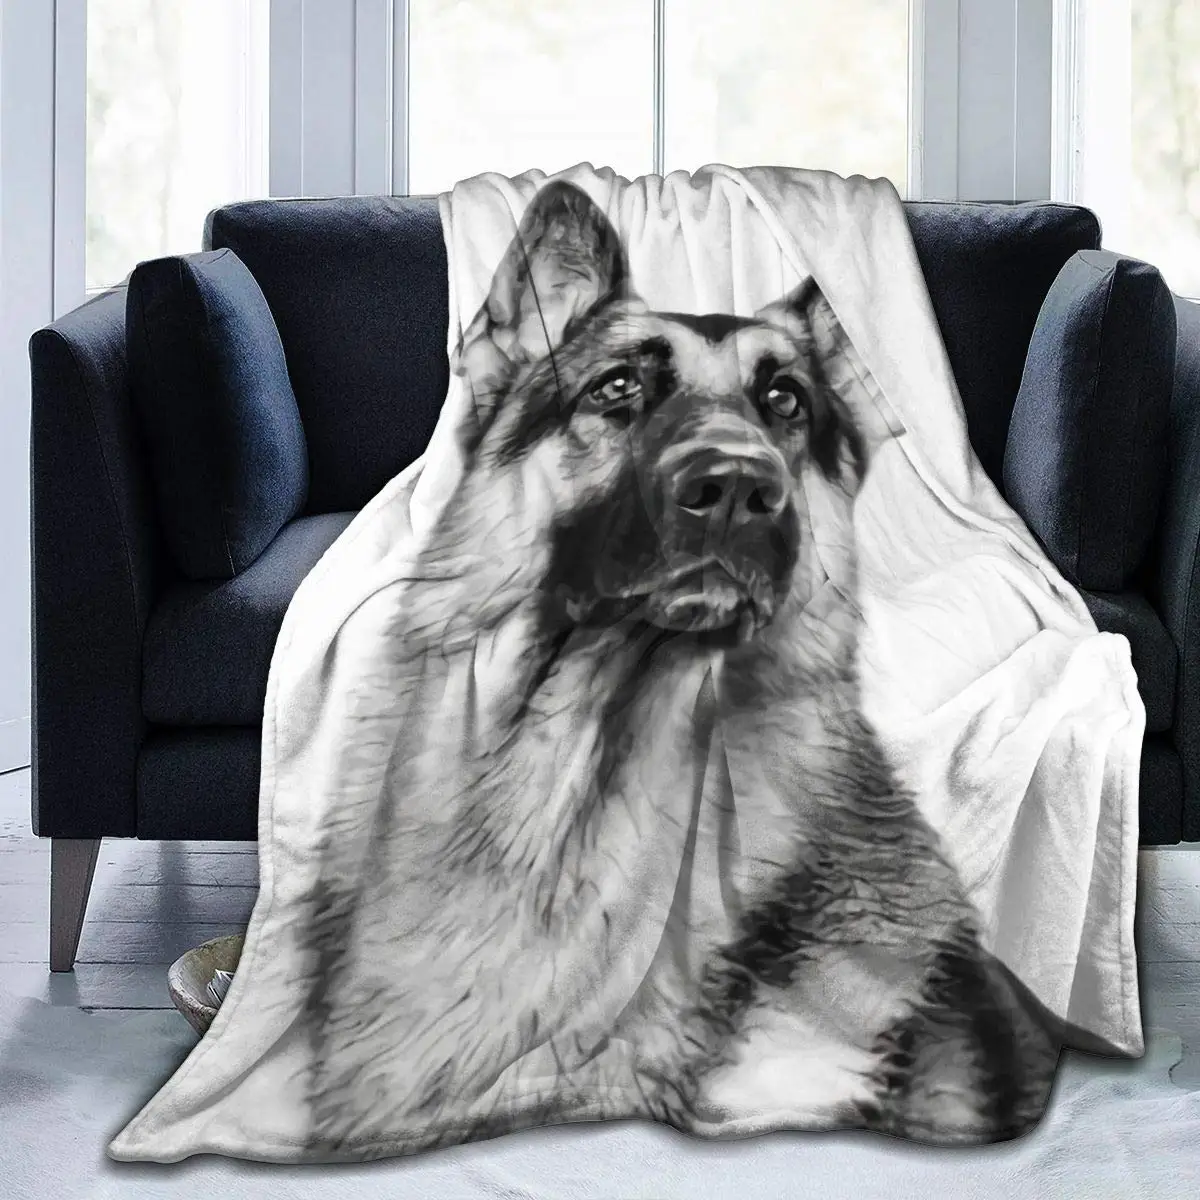 

German Shepherd Blanket Dog Flannel Throw Bed Blankets Cozy Lightweight Soft Bedspreads Bedding for Sofa Couch Bed Home Decor